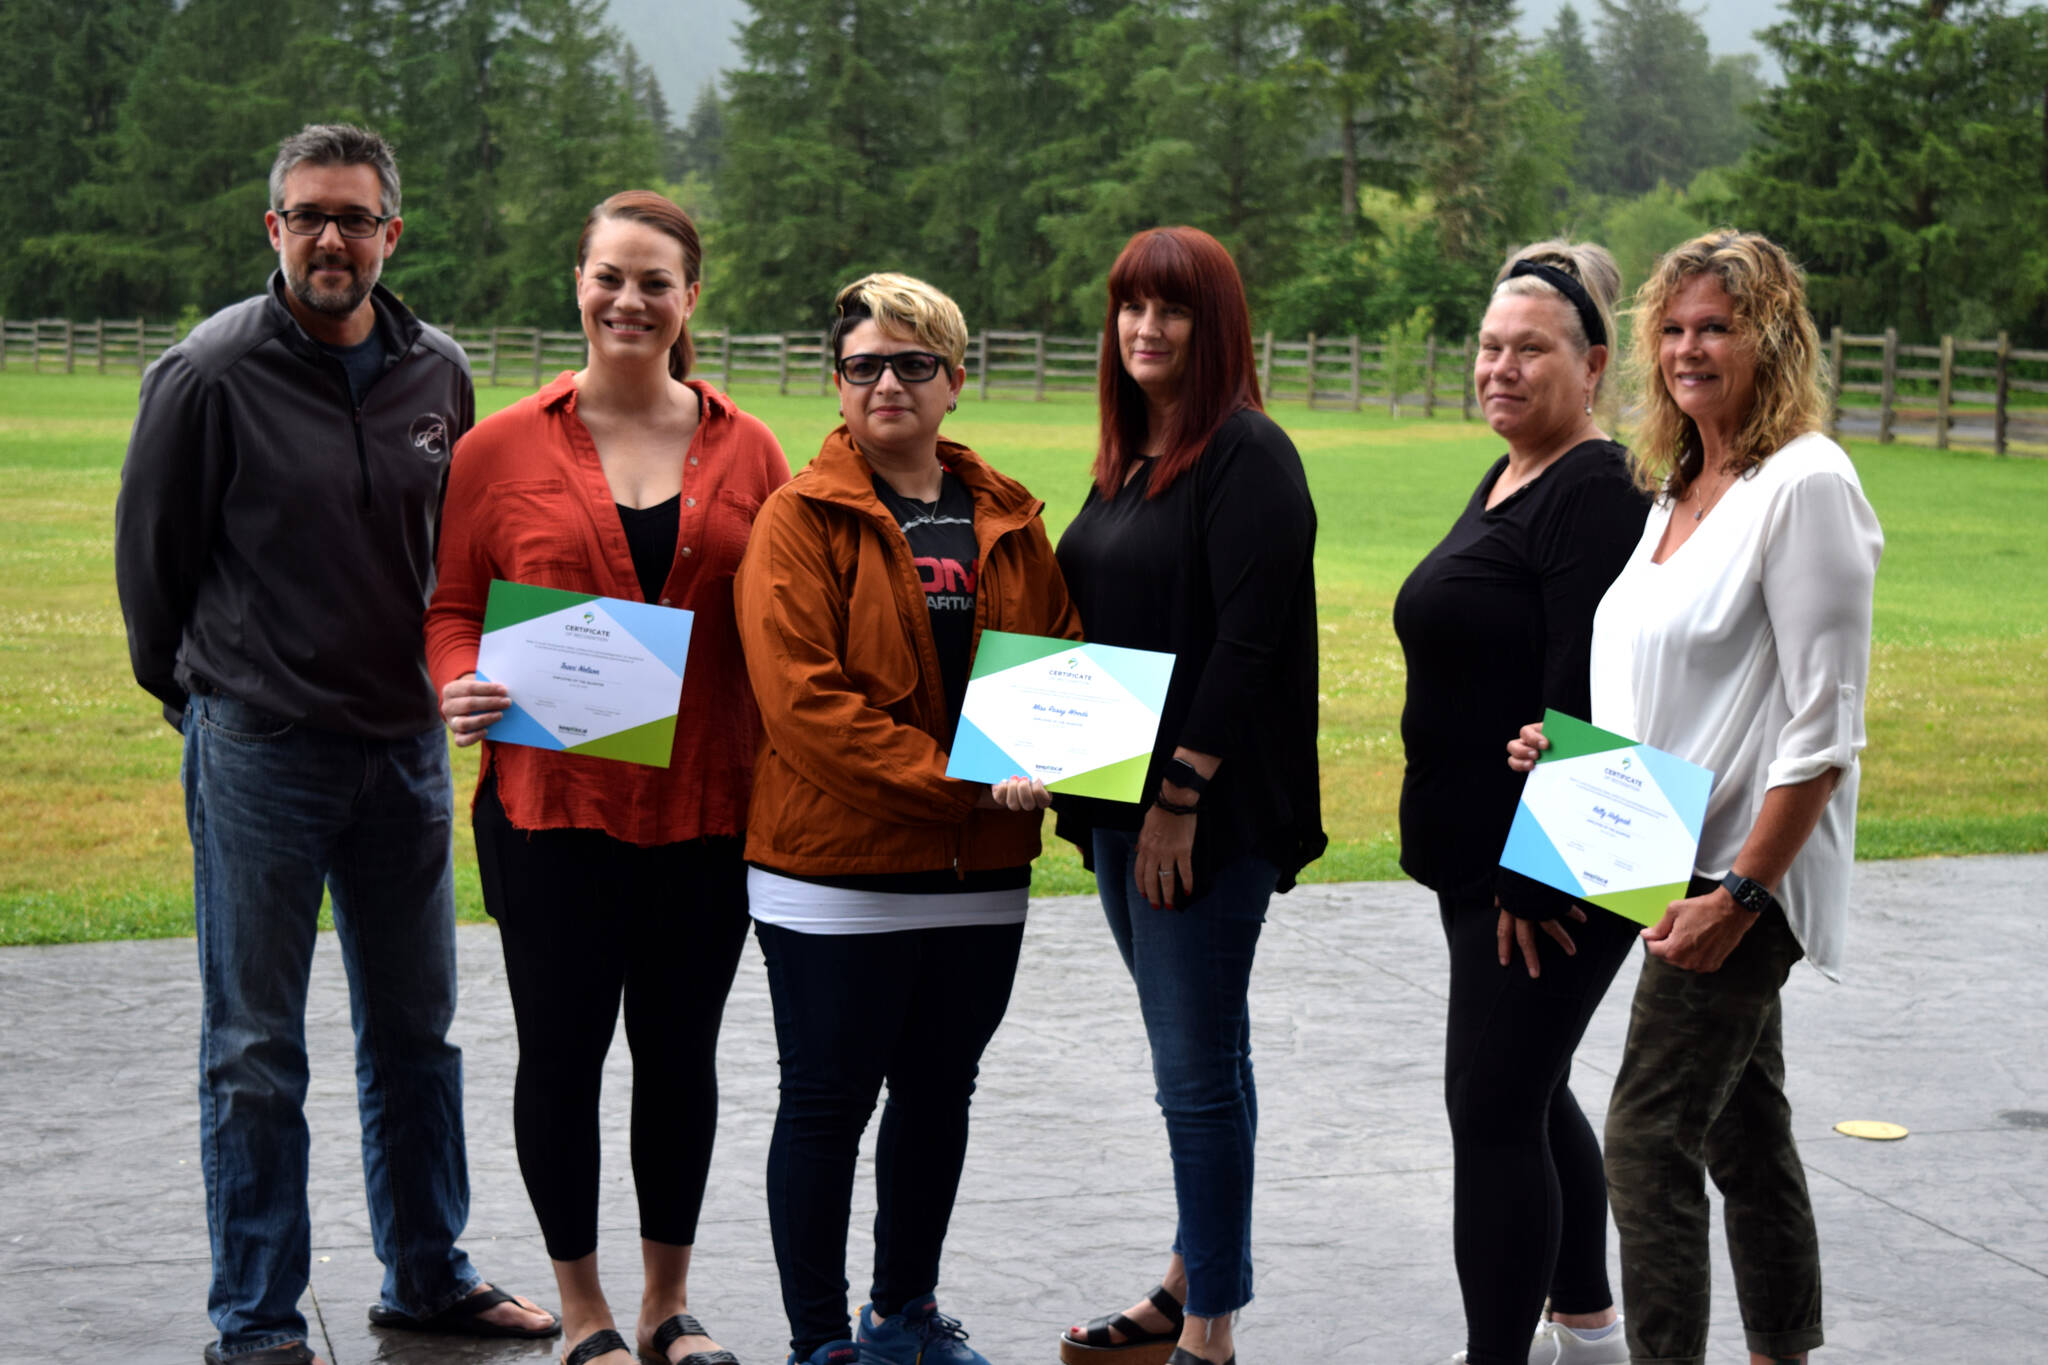 Winners of the Keep It Local Snoqualmie Valley contest and those who nominated them pose for a photo on June 29. From left: Ryan Seal and Traci Nelson of Sigillo Cellars. Miss Russy Woods and Karen Bowers of DMW Martial Arts and Kimberlea Miller and Kelly Holyoak of Wildflower Bistro. Photo by Conor Wilson/Valley Record.